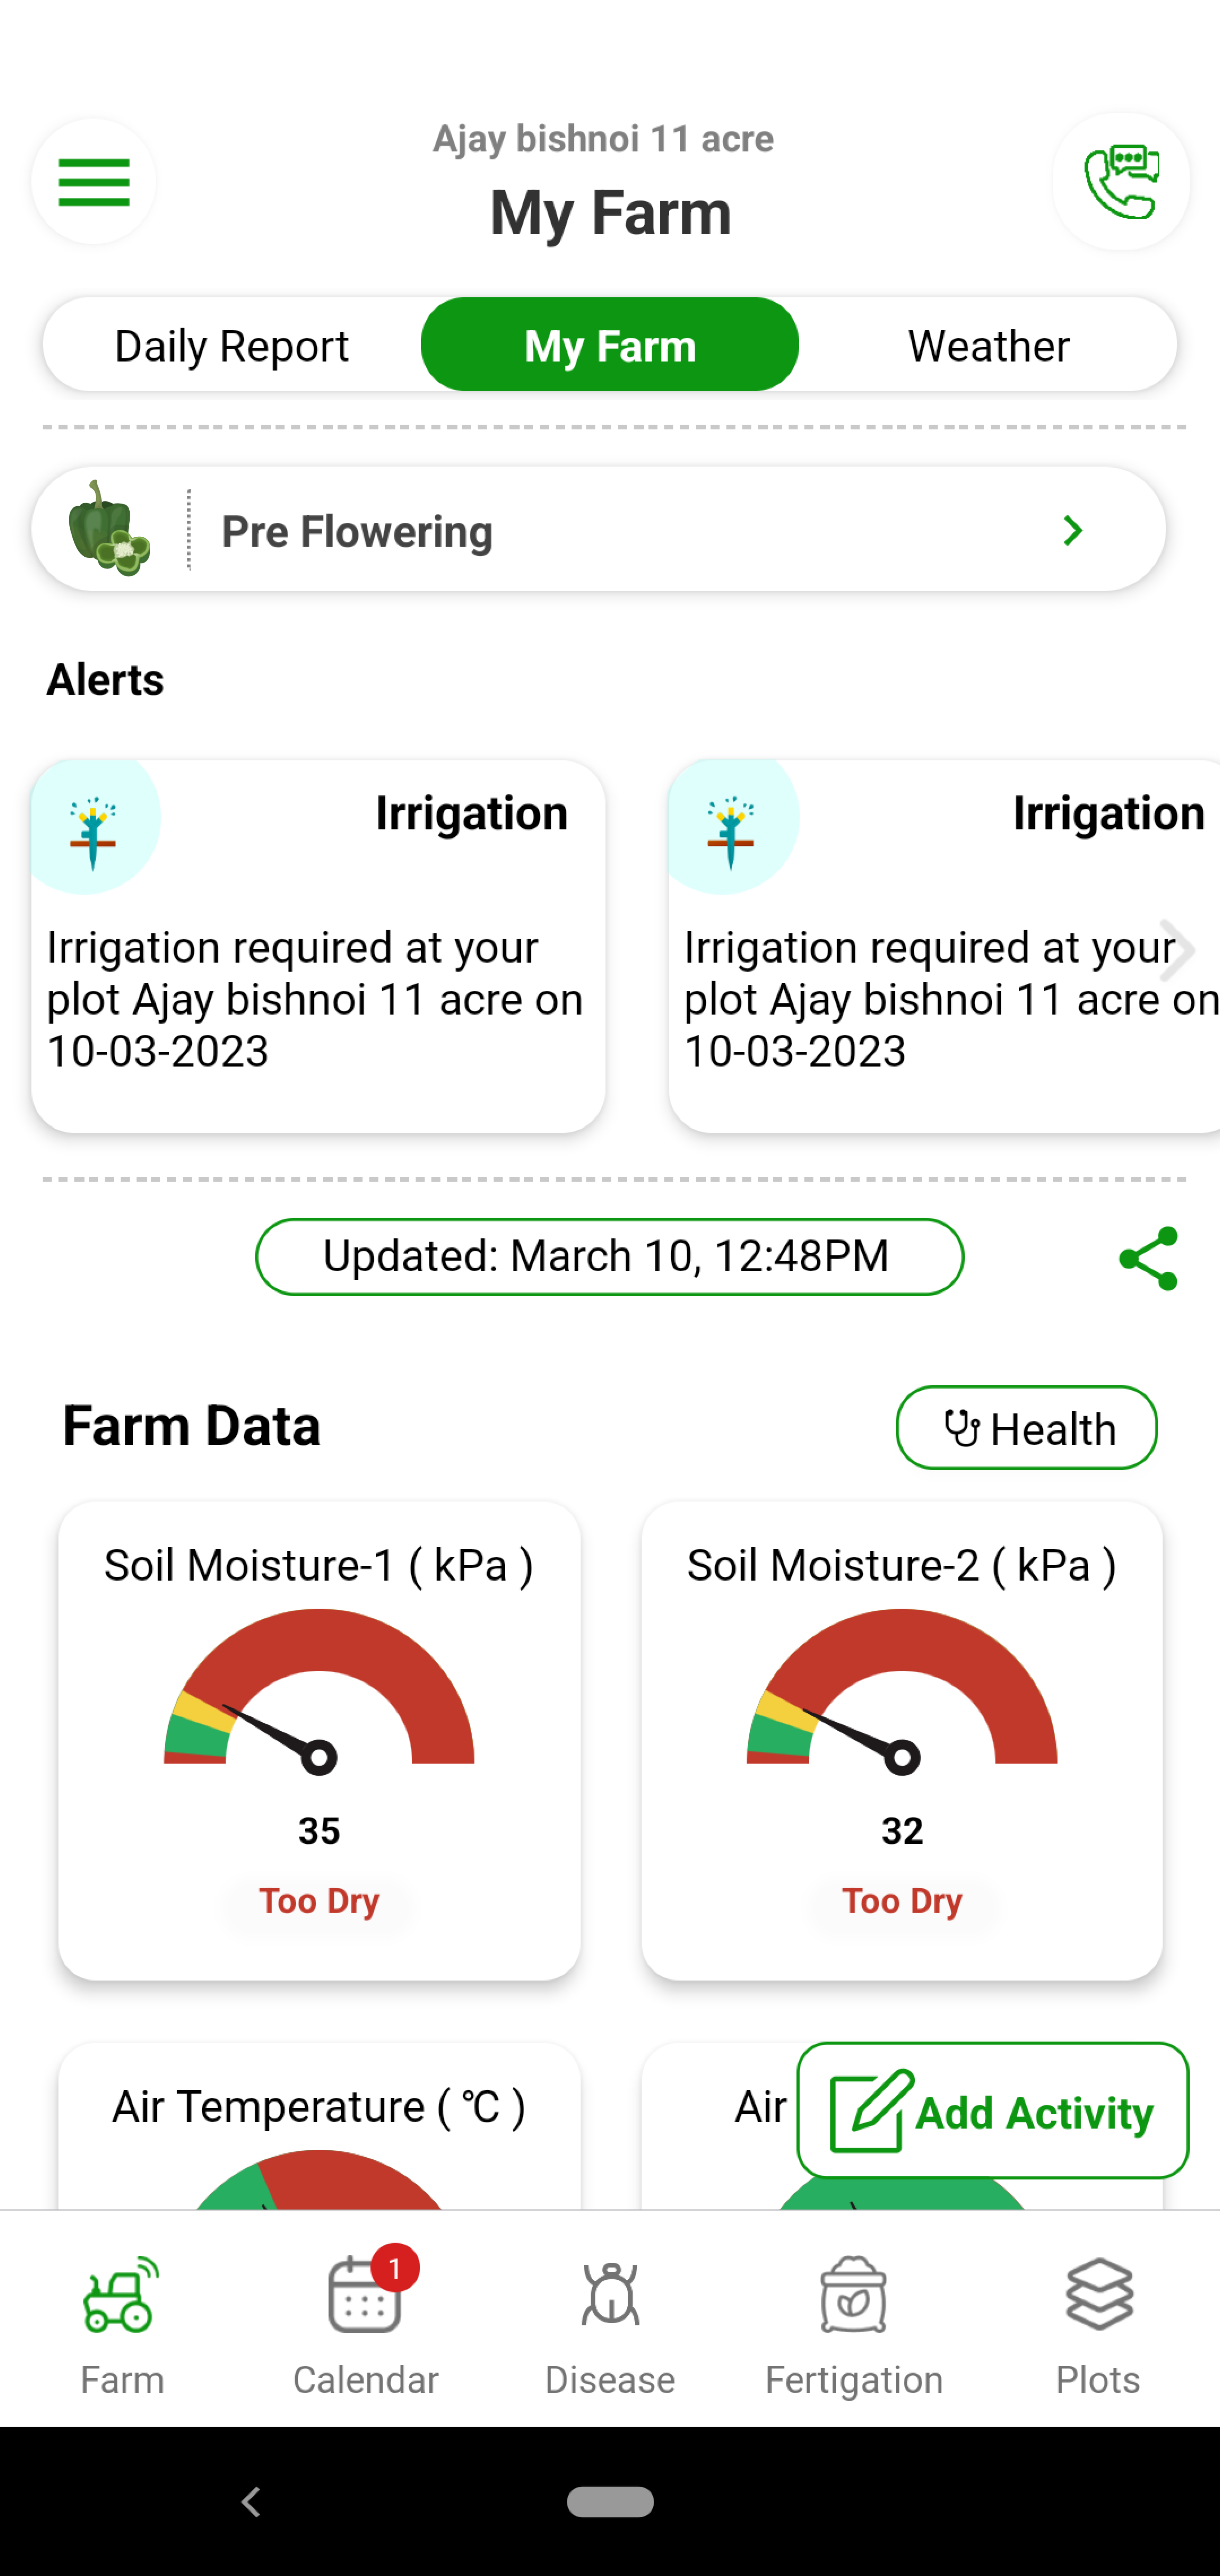 Too much water or too less water can be very harmful for capsicum. Over irrigation leads to wilting in the plants. Capsicum’s water requirements vary based on soil type and stage. With Fyllo’s device containing soil moisture and soil temperature sensor and intelligent software, you get alerts on how much water to provide to the crop. You can also see and visualize evapotranspiration (Etc) values of the crop. You can perfectly manage the water requirements to get the perfect size, color and sugar.